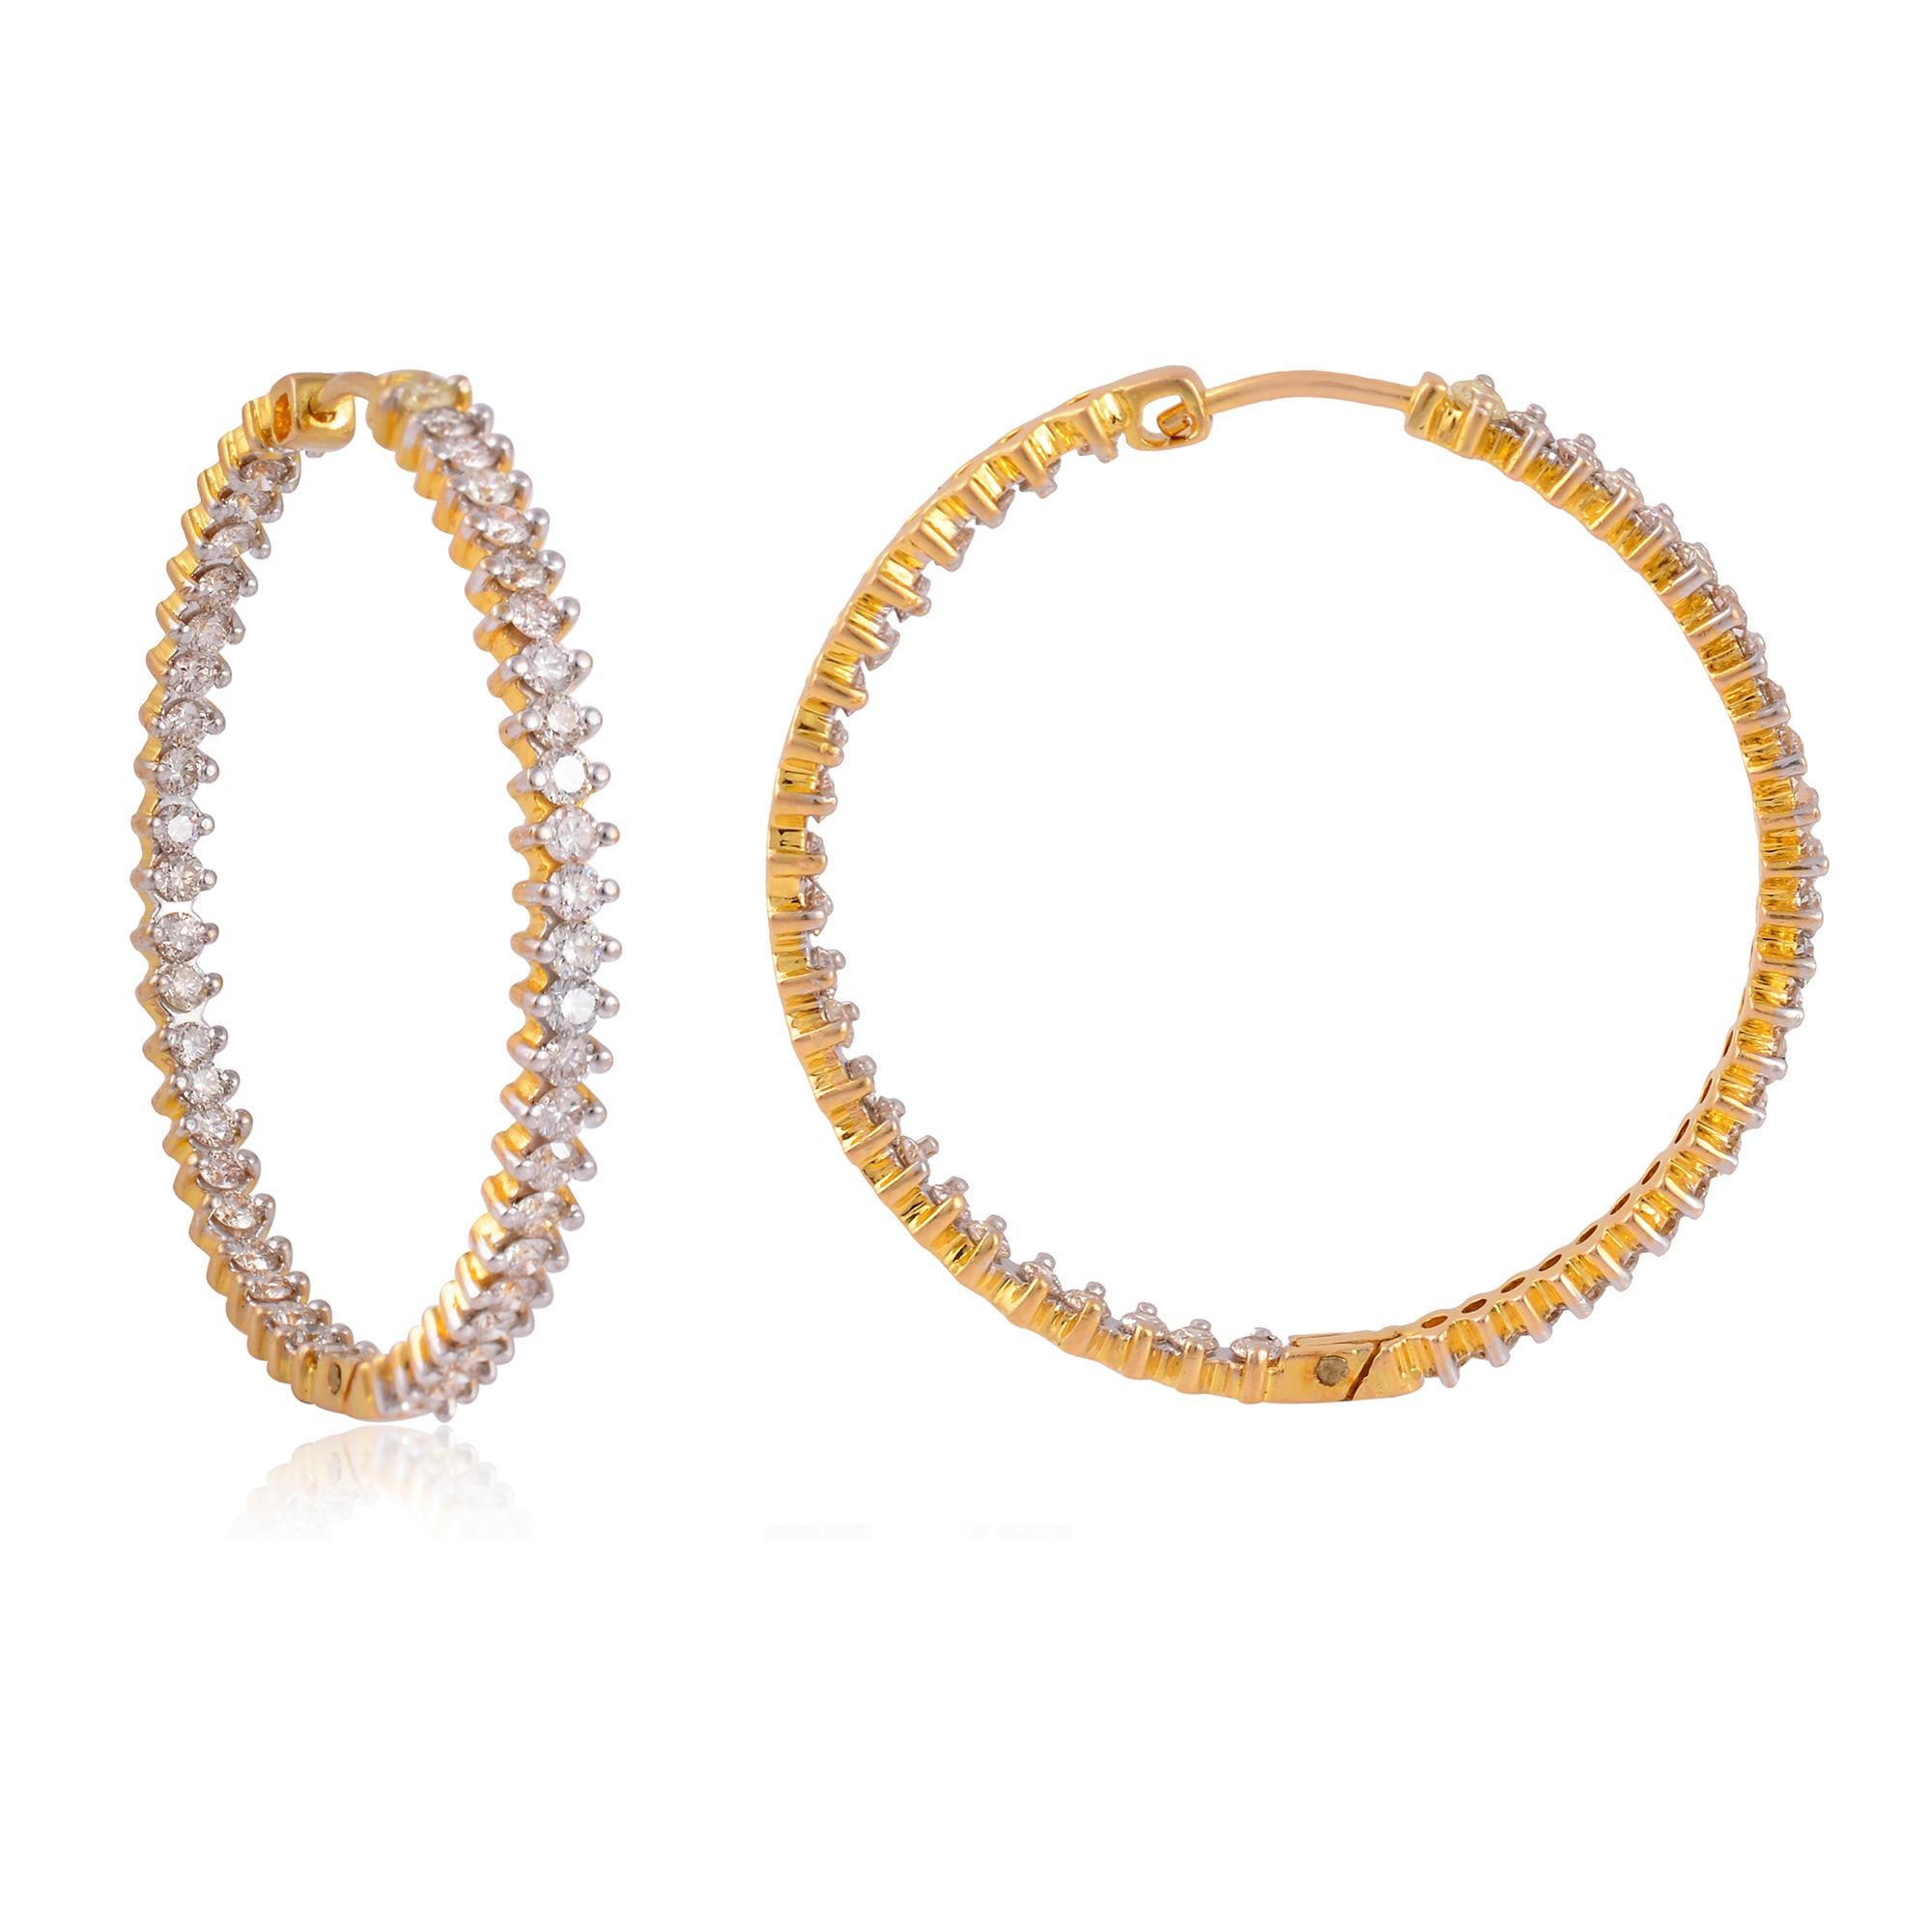 Cast in 18-karat gold, these beautiful inside out hoop earrings are hand set with 3.20 carats of diamonds. 

FOLLOW MEGHNA JEWELS storefront to view the latest collection & exclusive pieces. Meghna Jewels is proudly rated as a Top Seller on 1stdibs